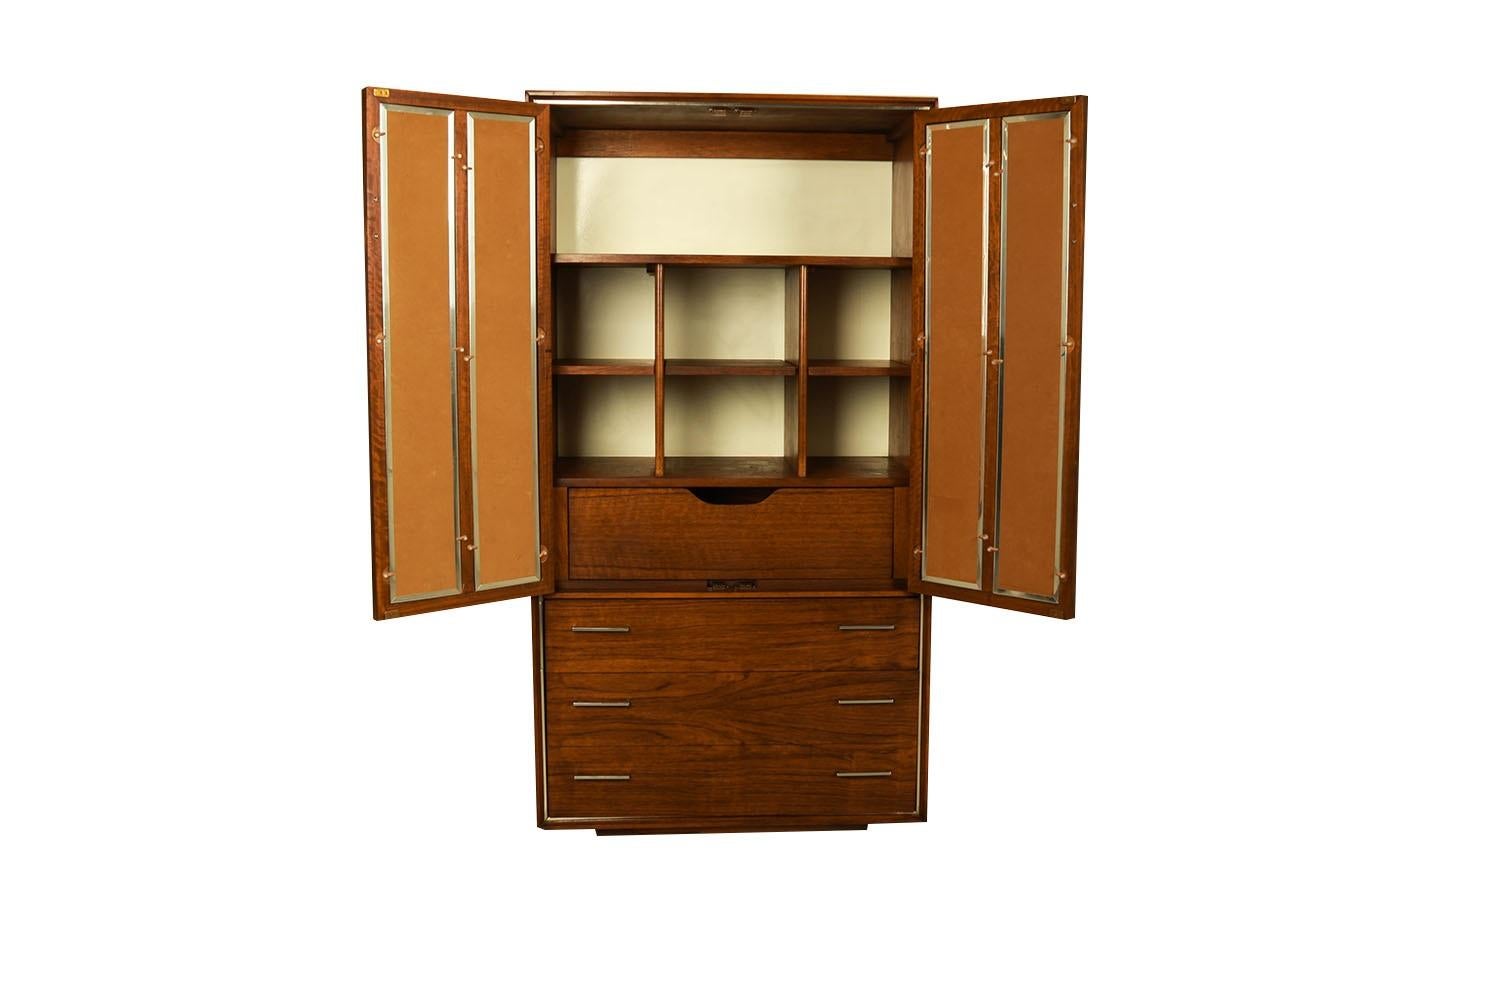 Late 20th Century Mid-Century Walnut Chrome Lane HighBoy Wardrobe Chest of Drawers For Sale